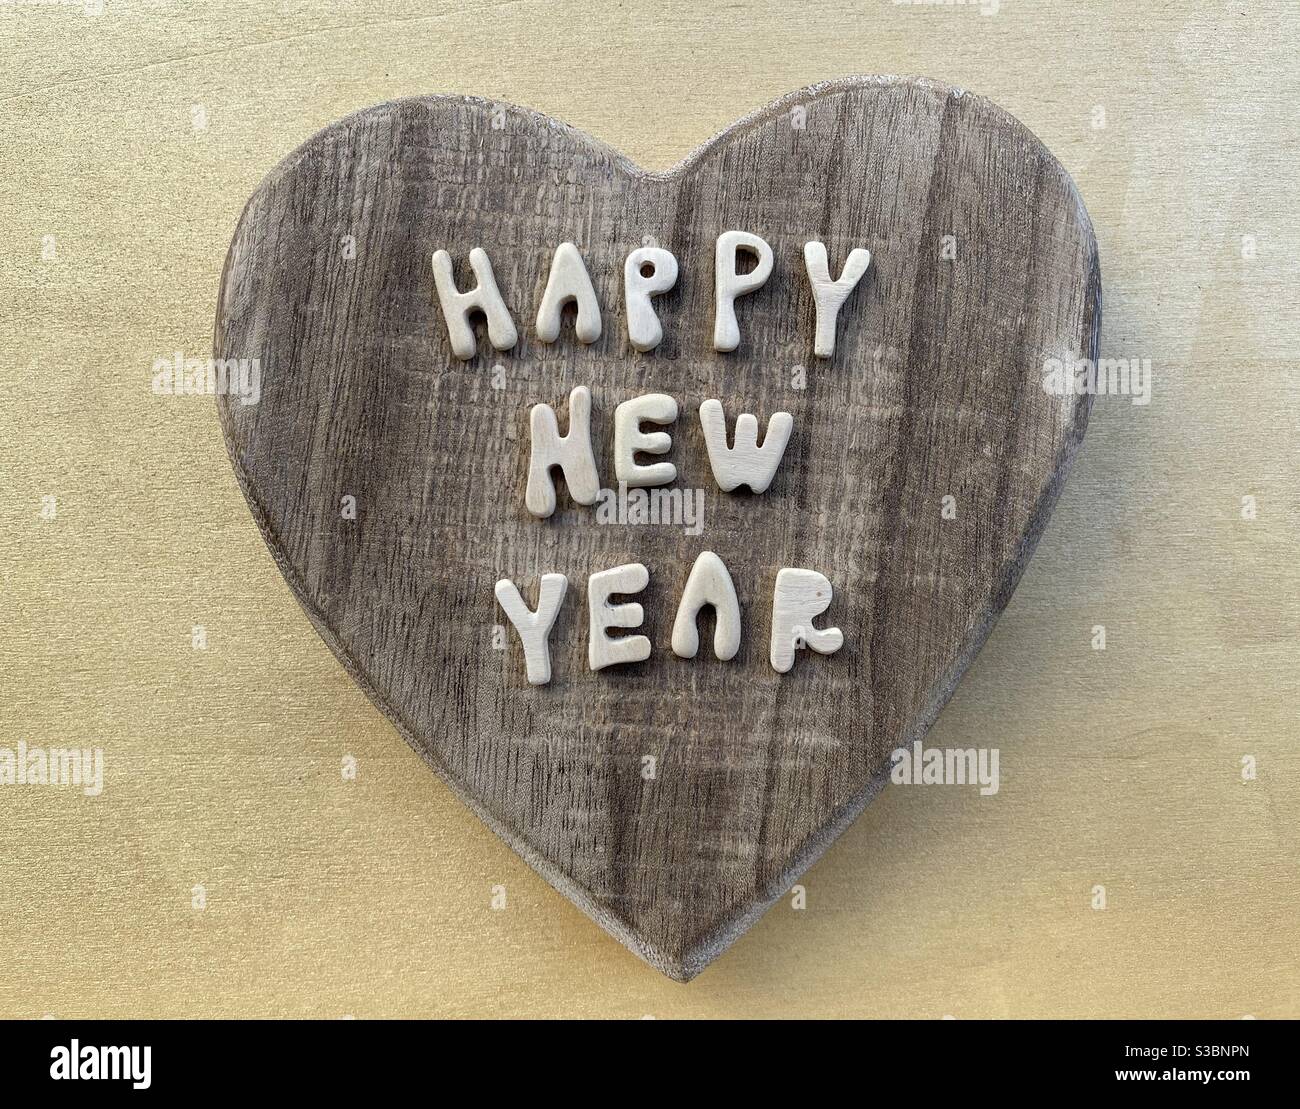 Happy New Year with wooden letters text over a wooden heart Stock Photo